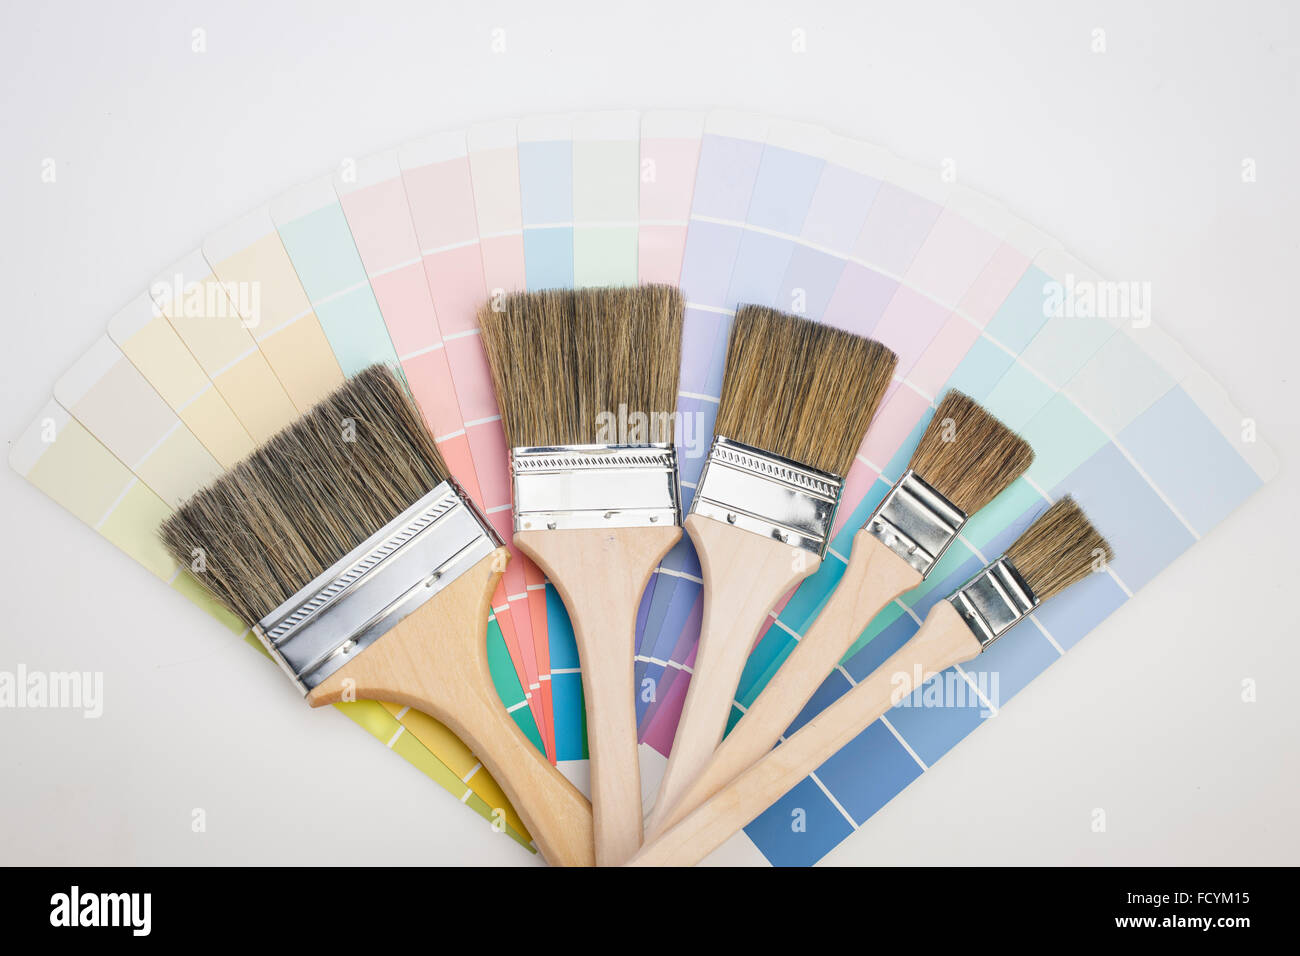 Different size of paint brushes on color scheme Stock Photo